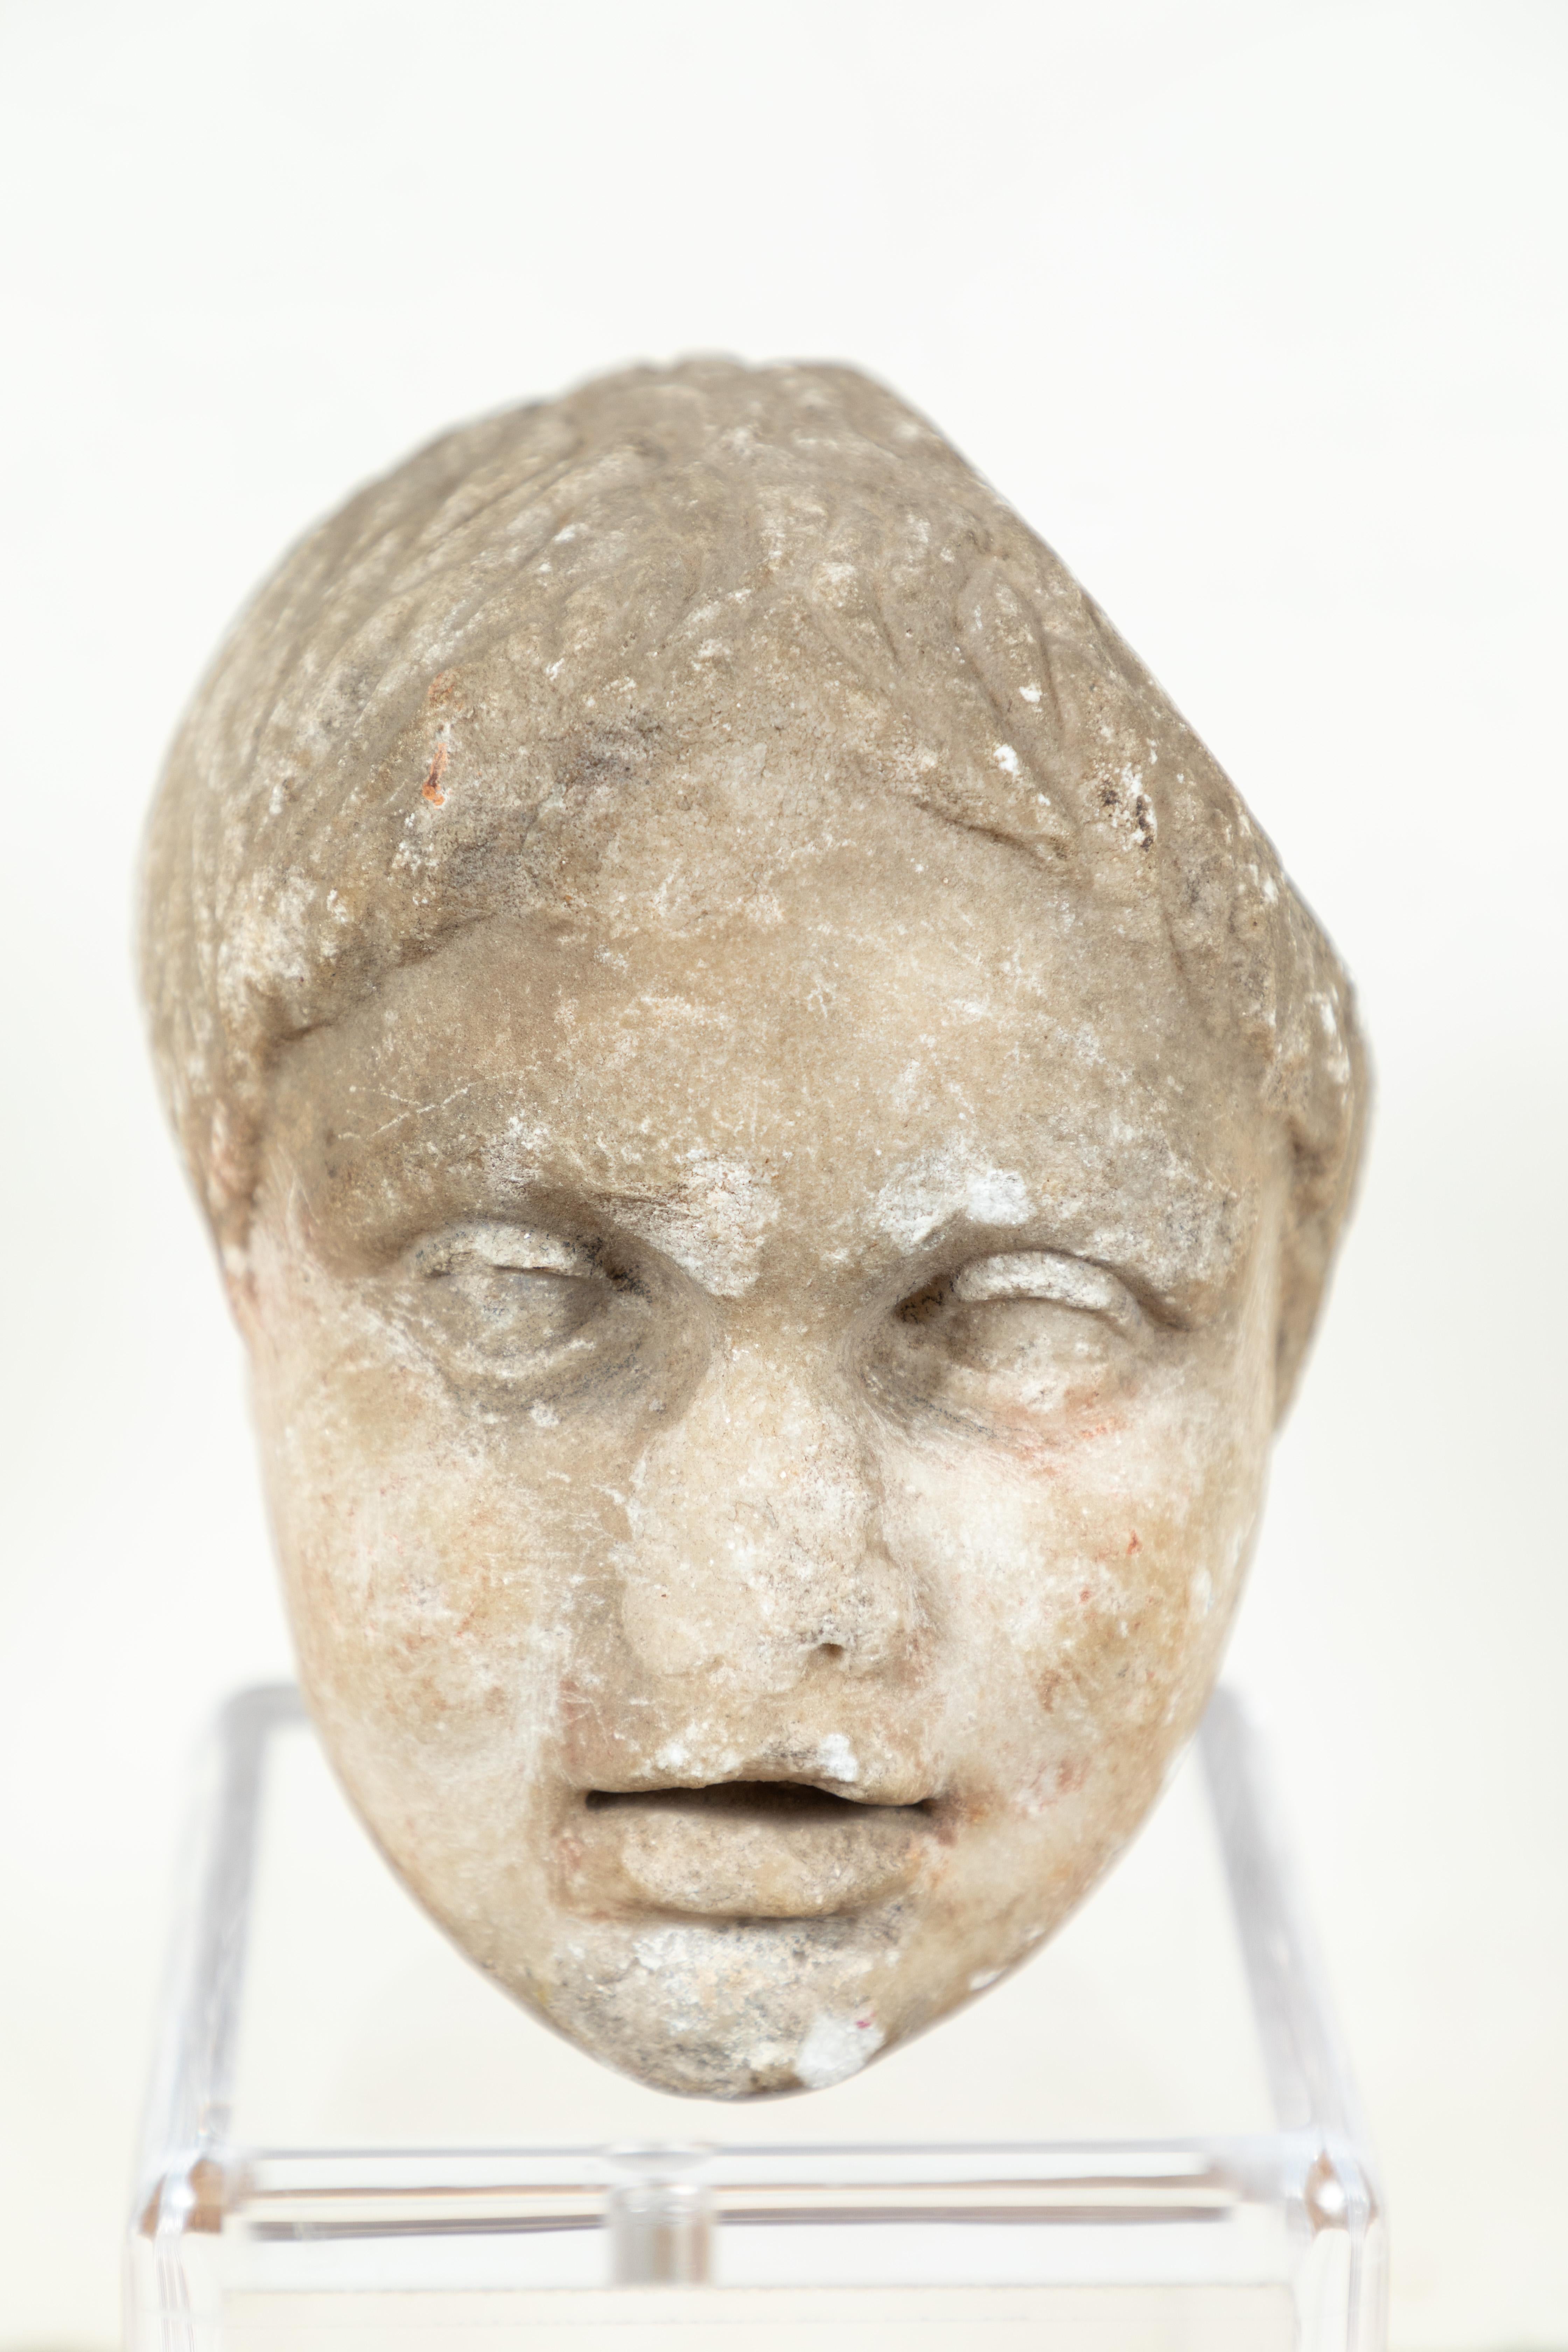 Sensitively carved, solid marble bust of a young boy mounted on a custom, Lucite base. Carved fully in the round, though originally the figure was part of a larger group. Acquired directly from a private collection in Naples, Italy.

Sculpture